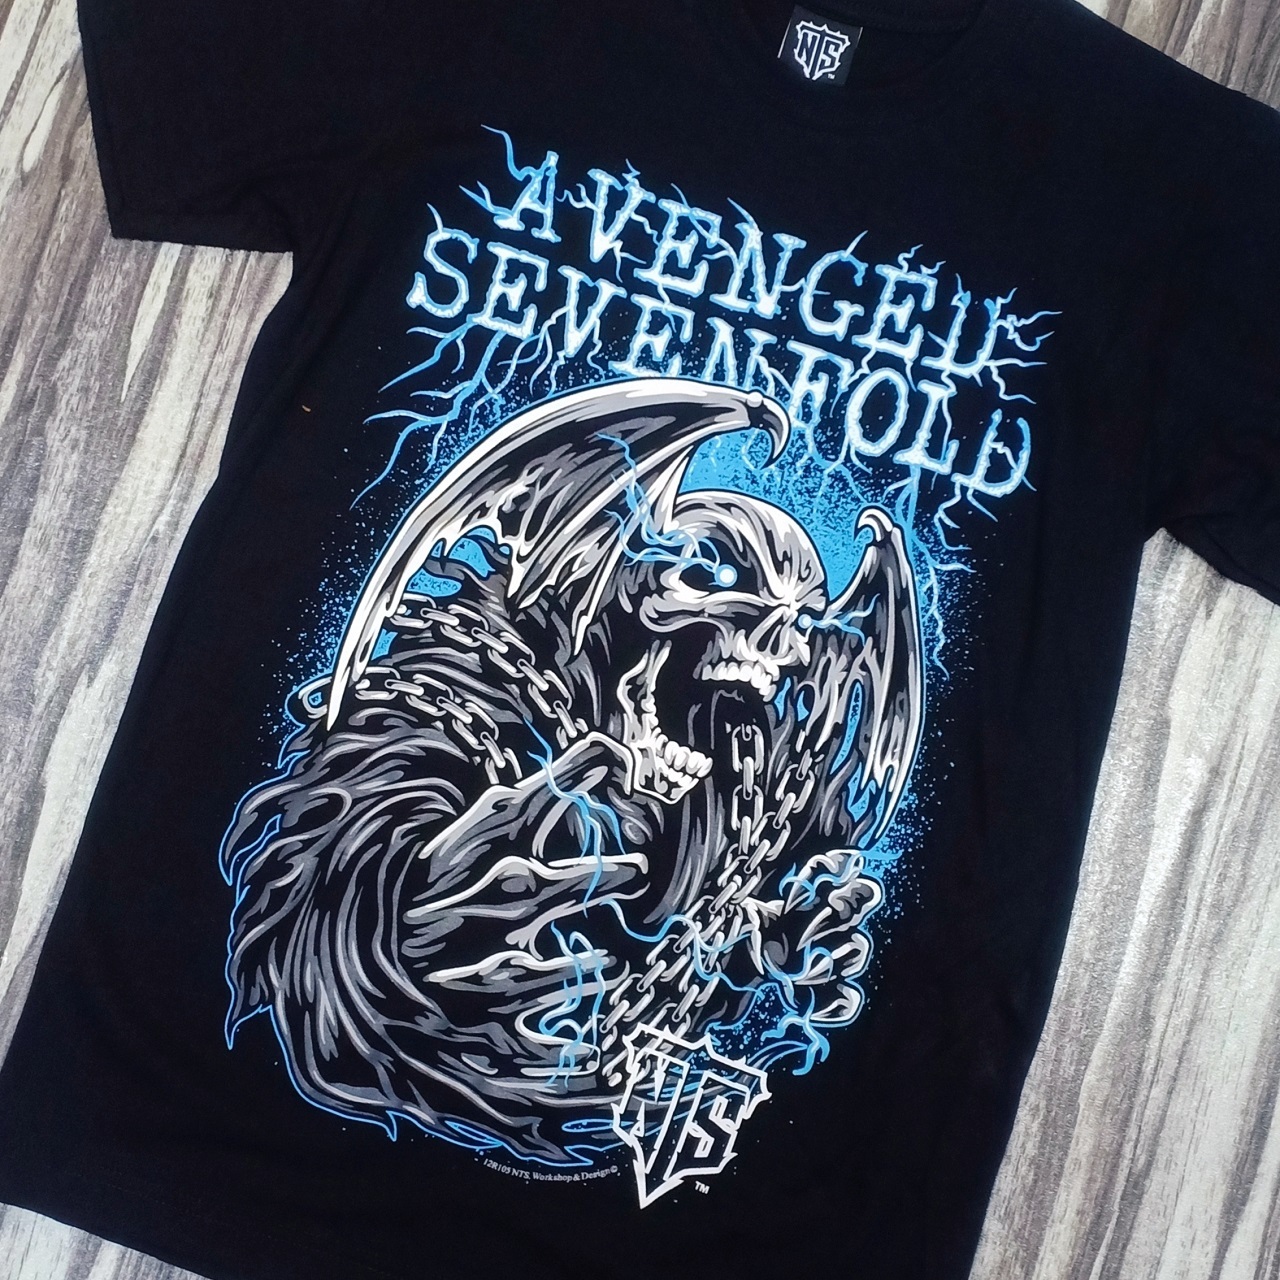 Erhverv farmaceut nyse 12R105 A7X AVENGED SEVENFOLD HEAVY METAL ROCK BAND CHAIN LIGHTNING NTS  ORIGINAL NEW TYPE SYSTEM COTTON T-SHIRT – PREMIUM GRADE BLACK TIMBER NEW  TYPE SYSTEM MOAI SPEED HIGH QUALITY SILK SCREEN COLLECTABLE